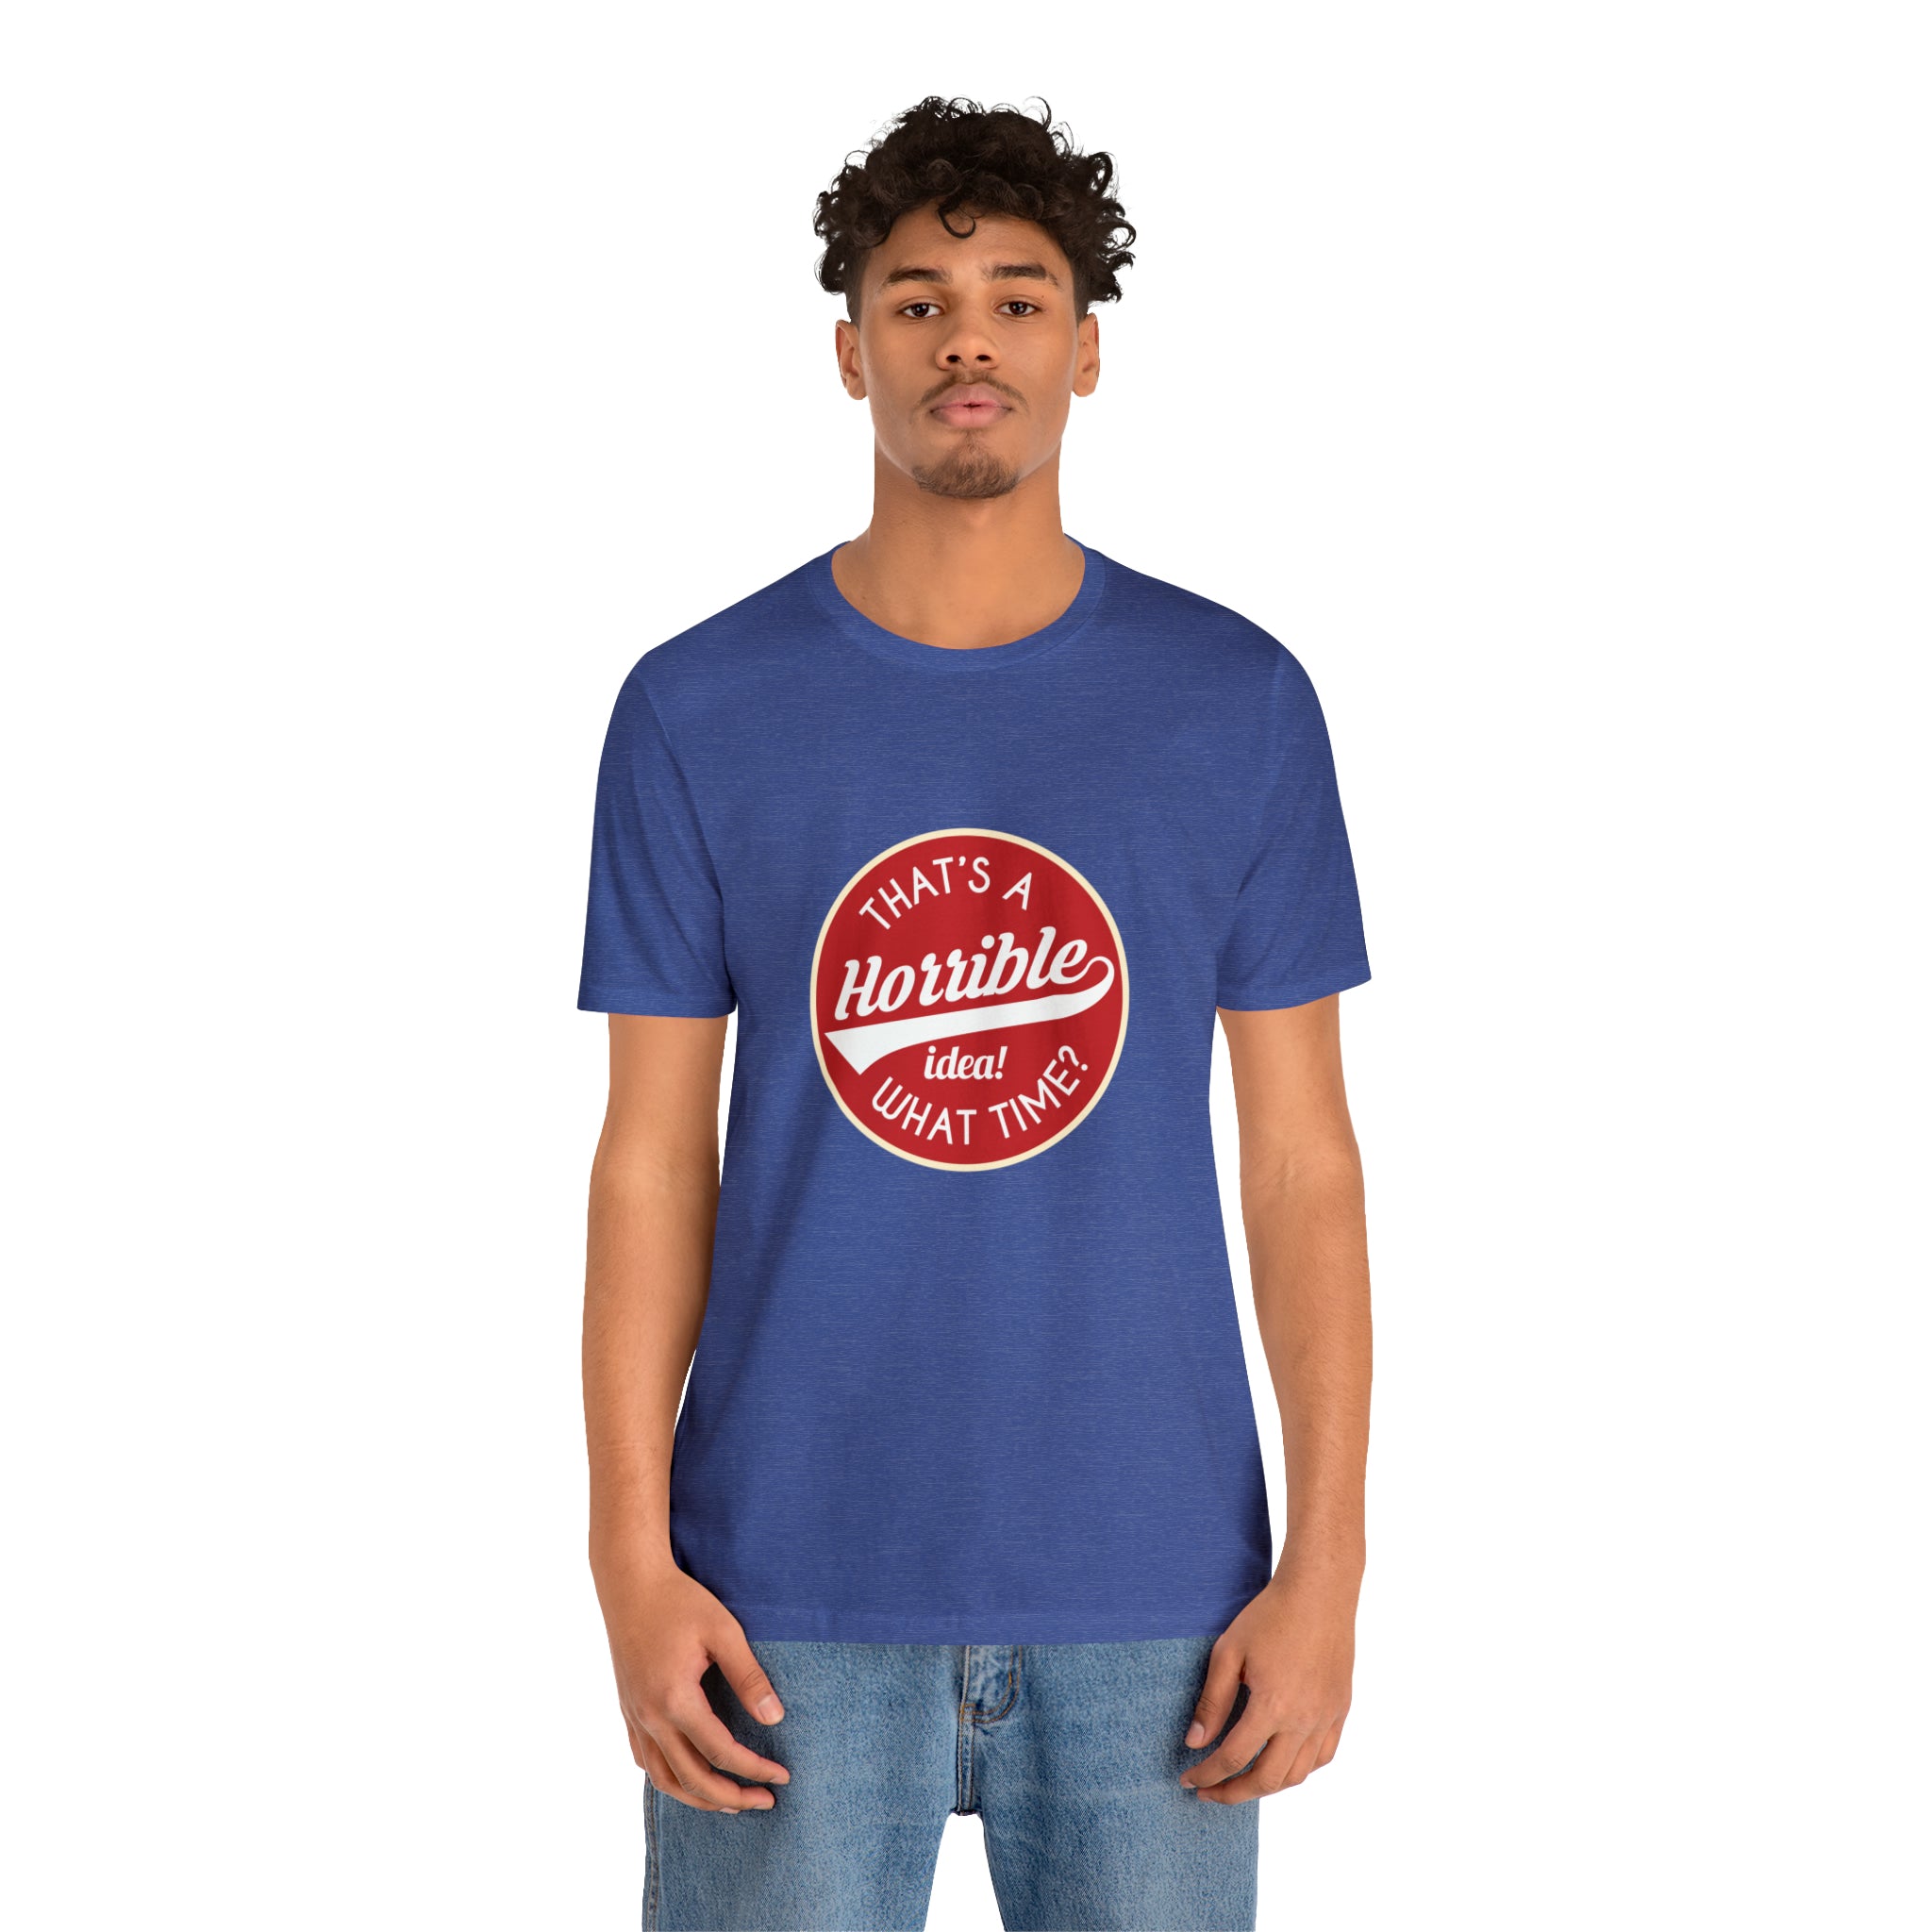 A man wearing a blue That's a horrible idea - what time T-shirt with a red and white logo, sporting a smart-ass attitude.